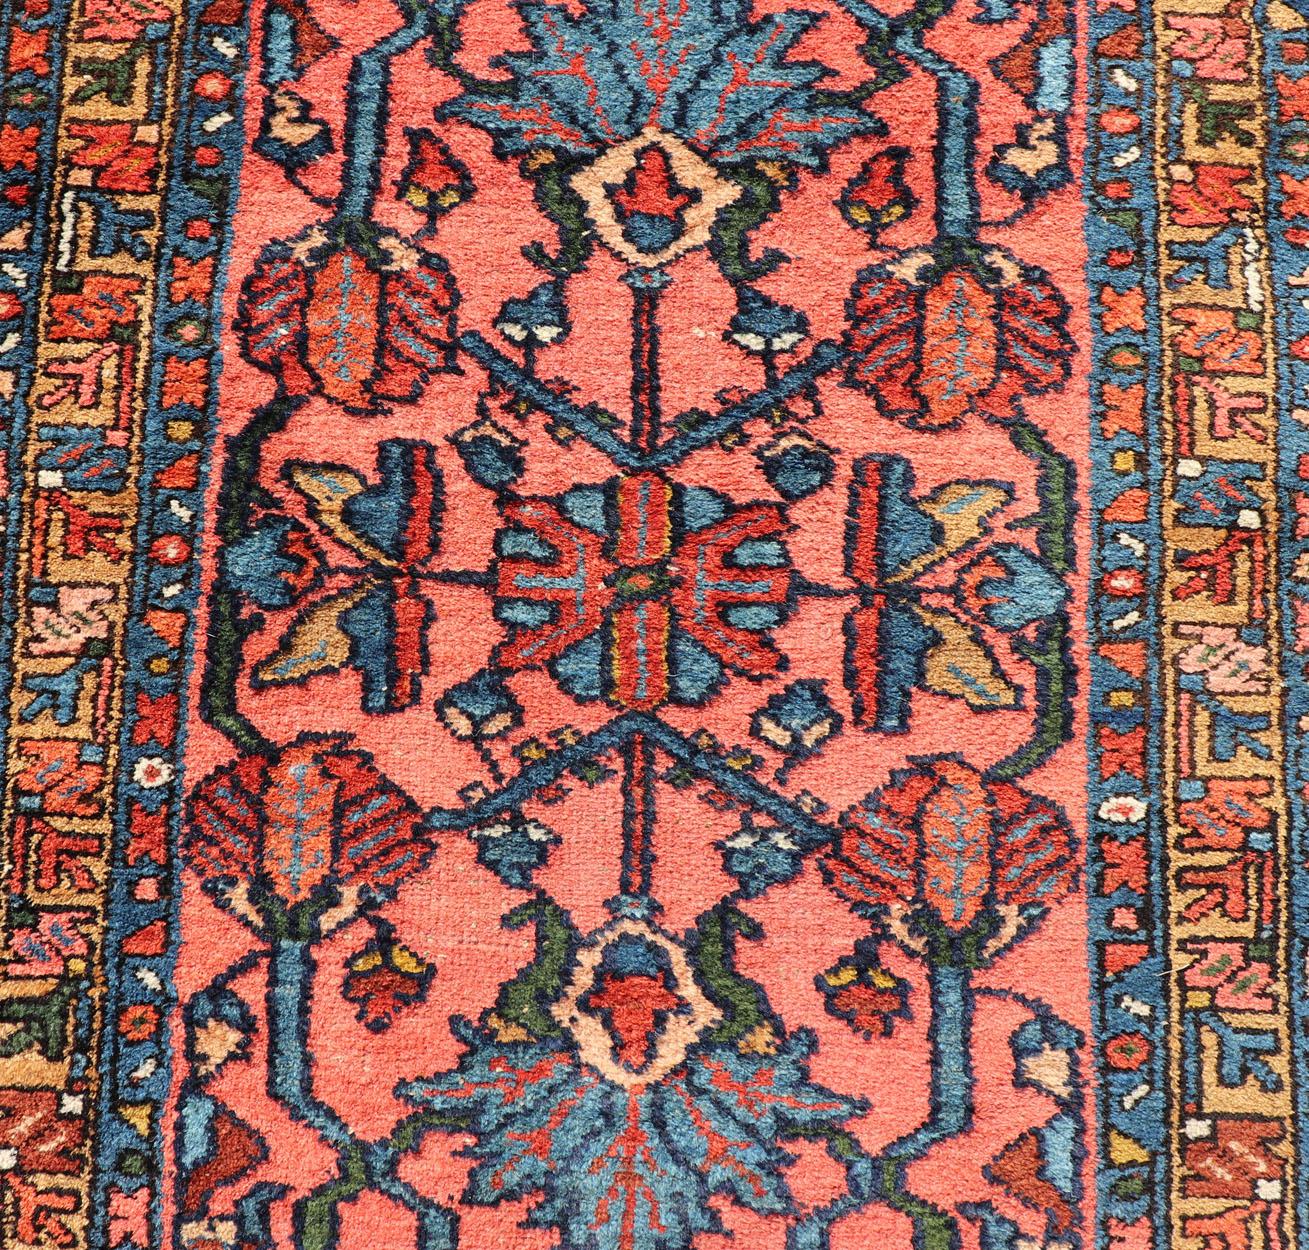 Antique Persian Lilihan rug in all-over design in jewel tones and pink field. Keivan Woven Arts / rug/ X23-0110, Antique Persian Lilihan. early 20th century. 

Measures: 2'8 x 5'1 

This woven Lilihan rug represents the best of Persian weaving.